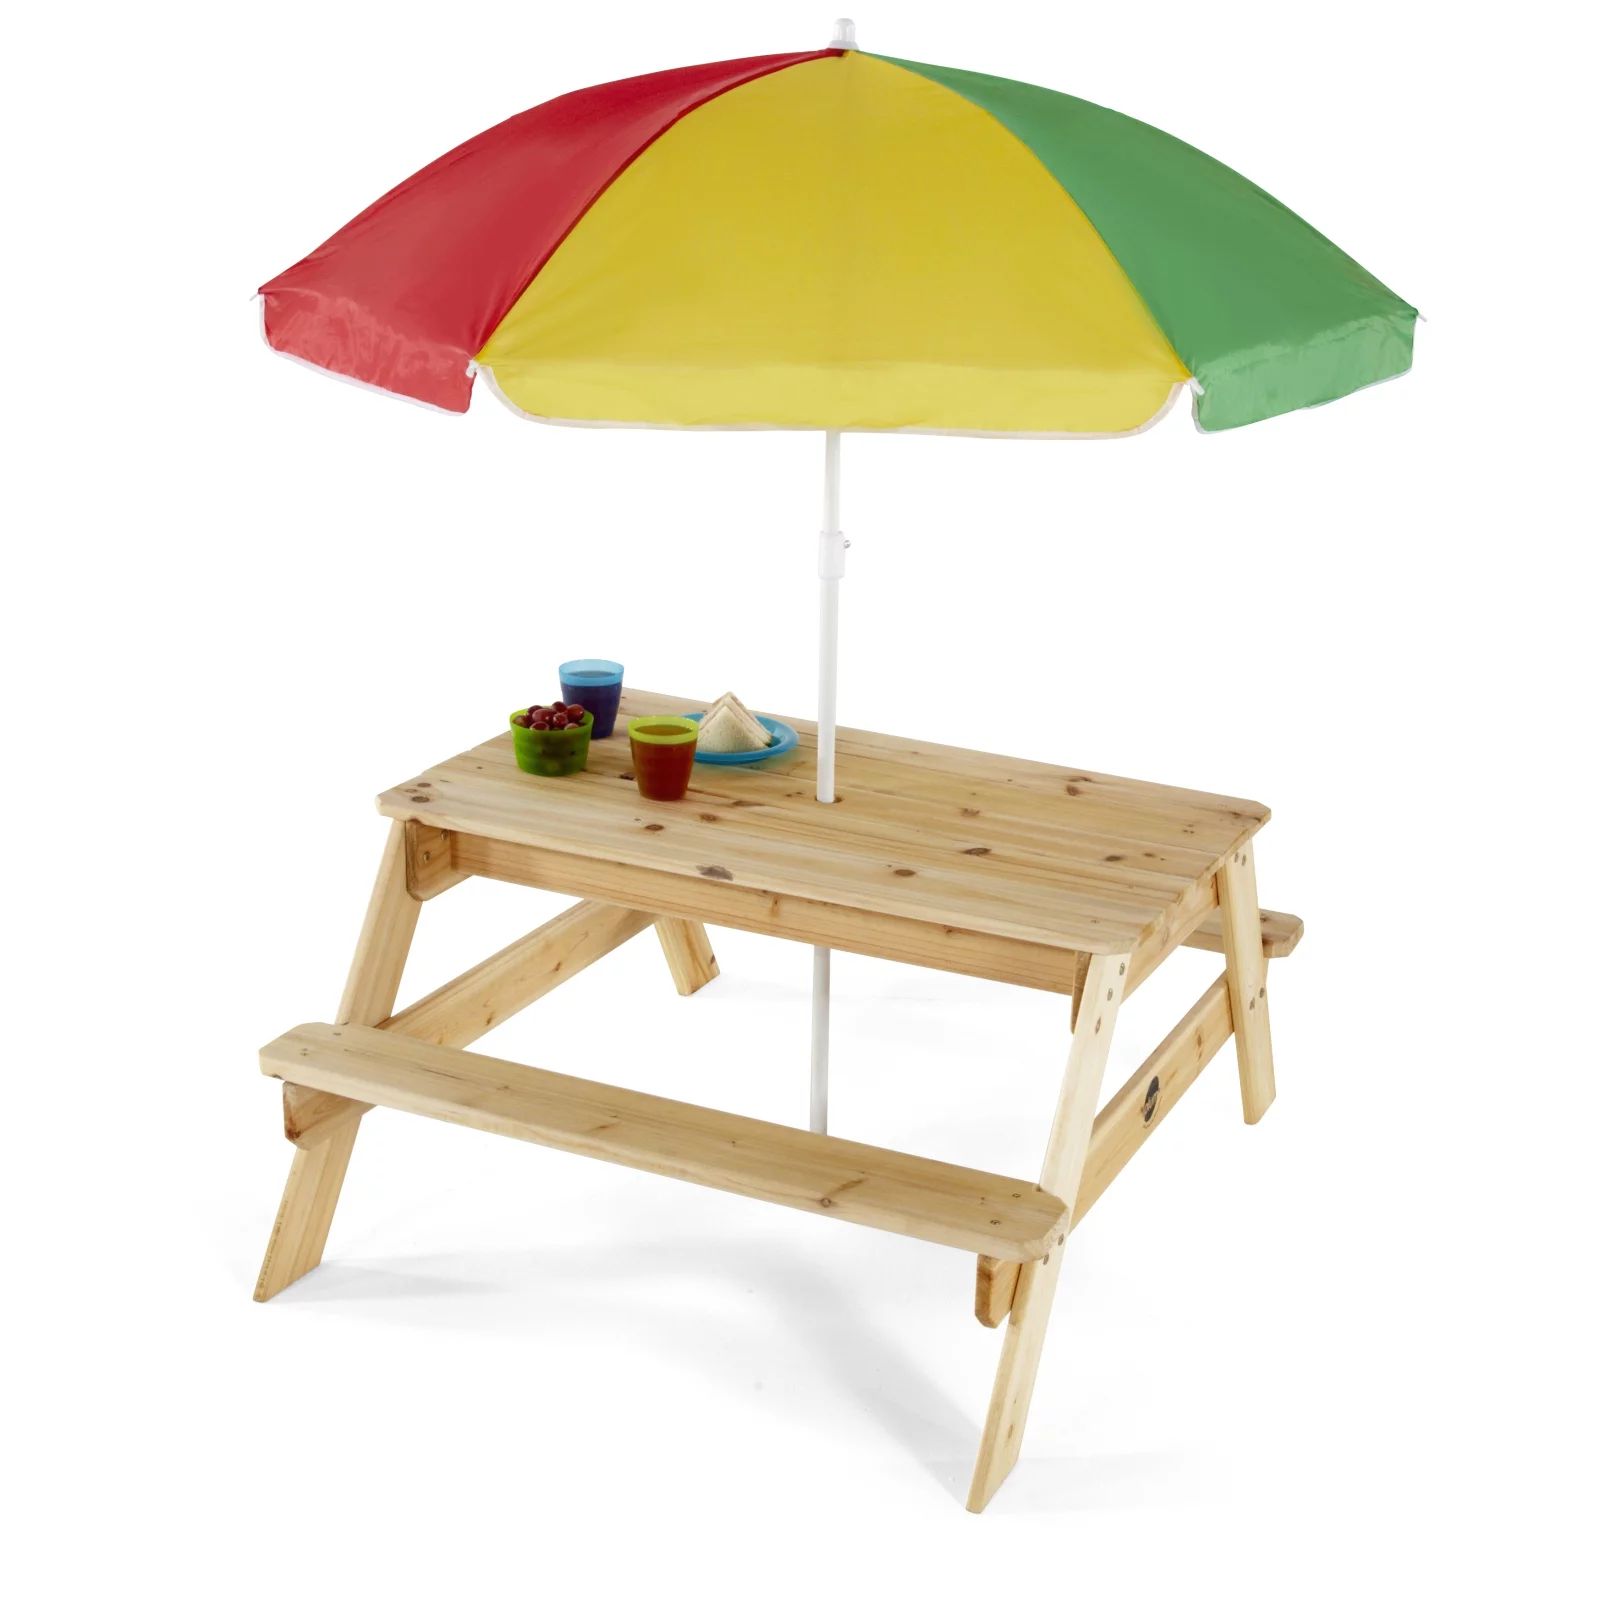 Plum Play Wooden Picnic Table with Parasol | Walmart (US)